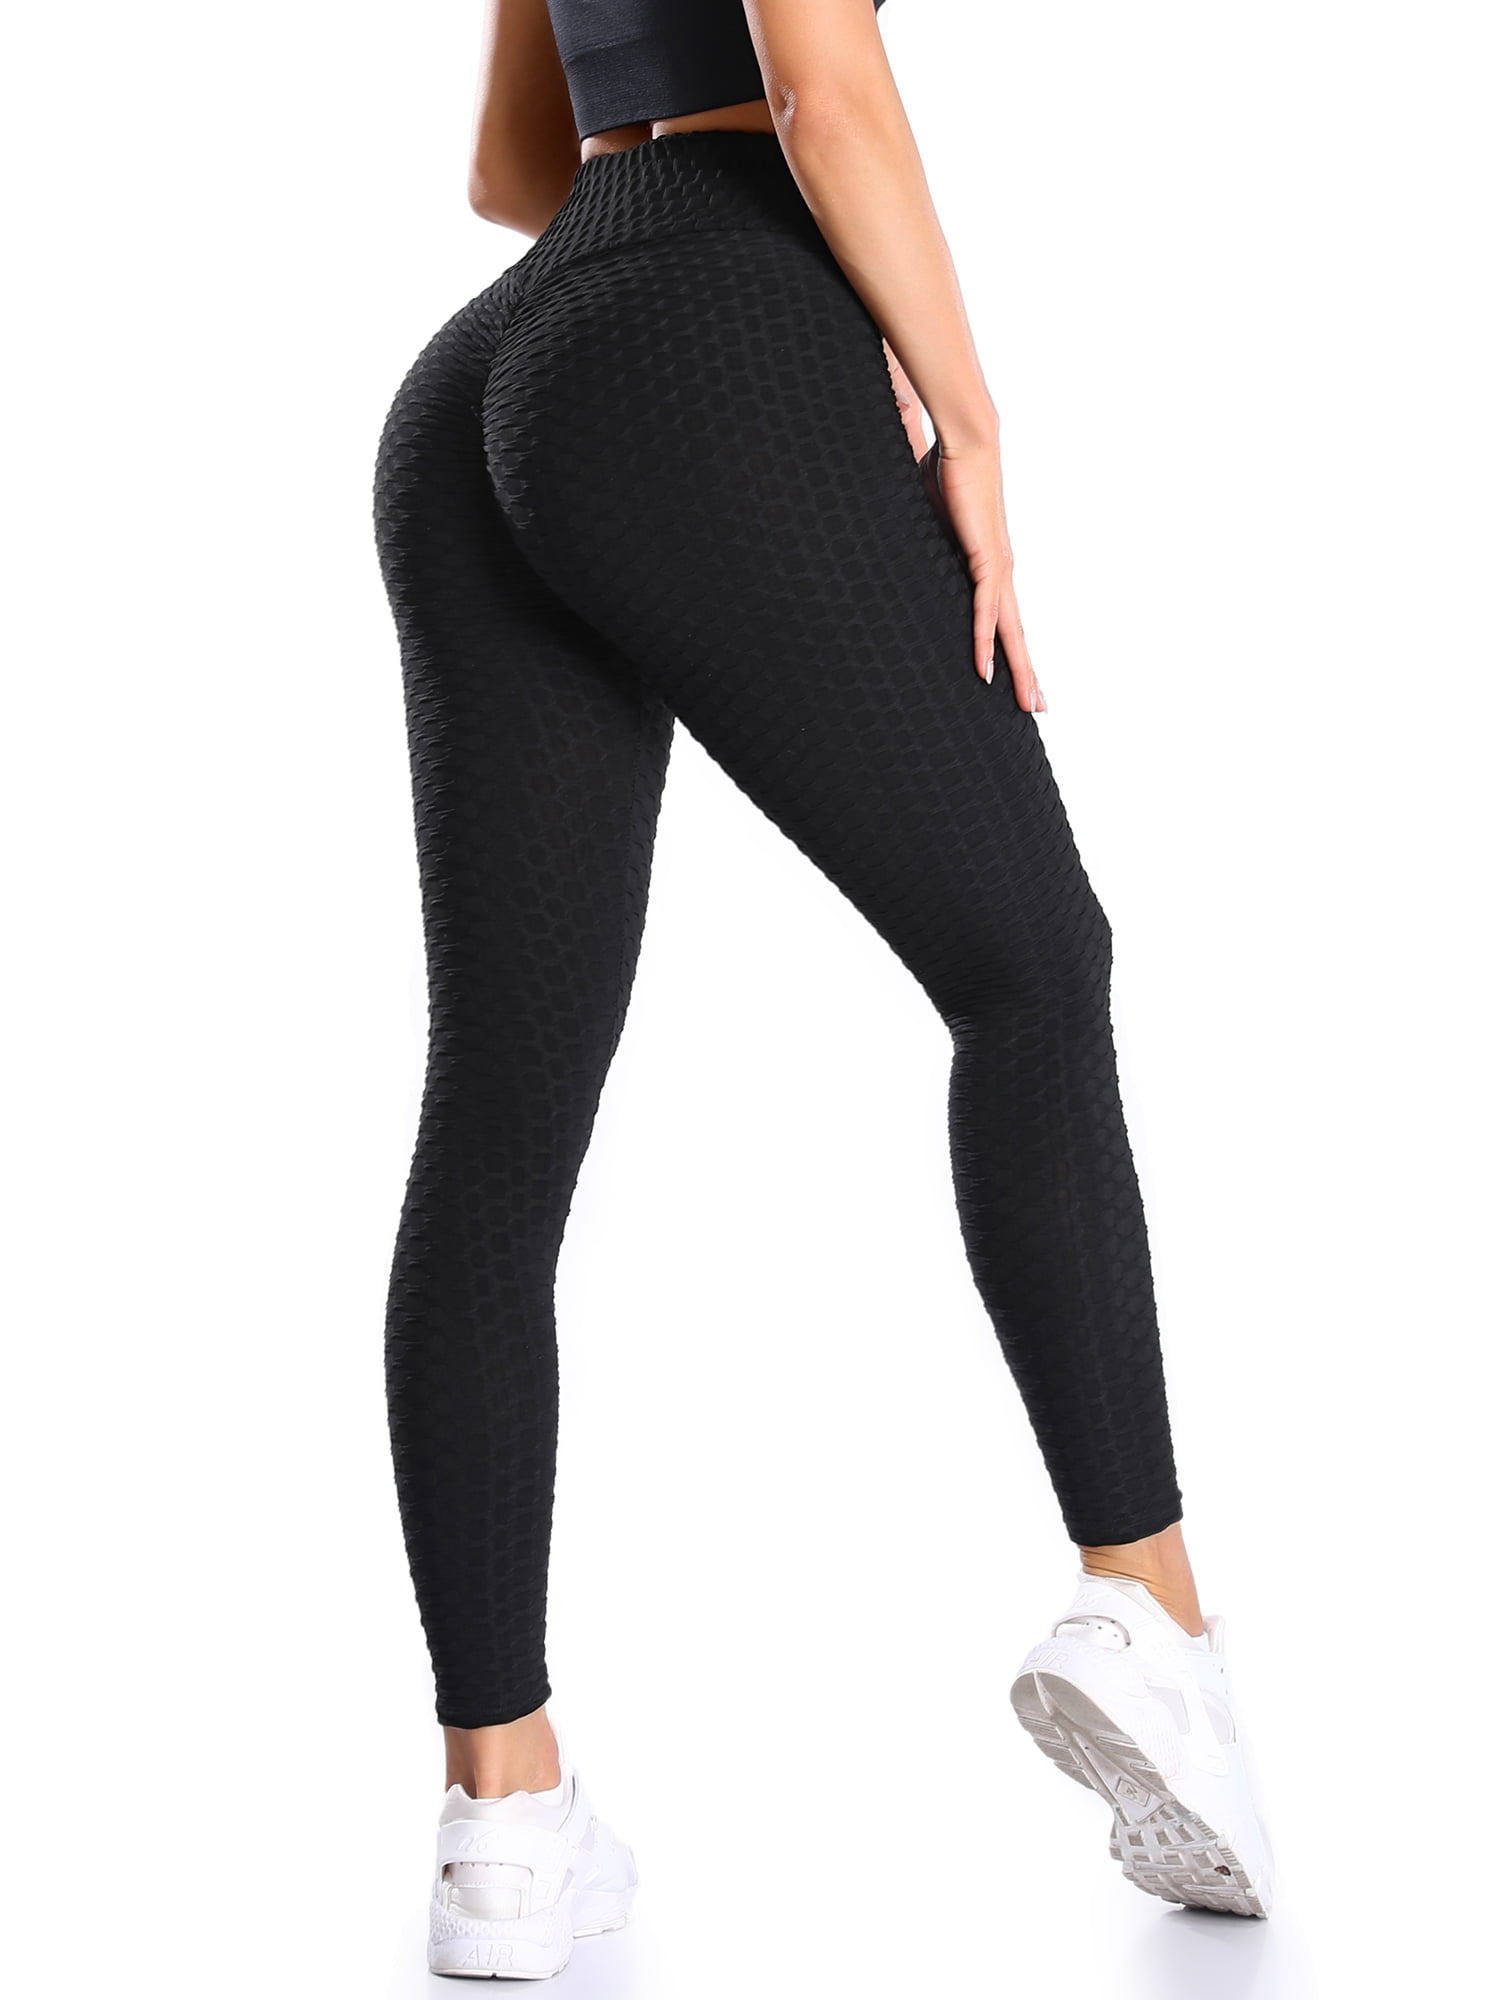 Womens High Waist Yoga Pants Anti-Cellulite Leggings Ruched Gym Sport Activewear